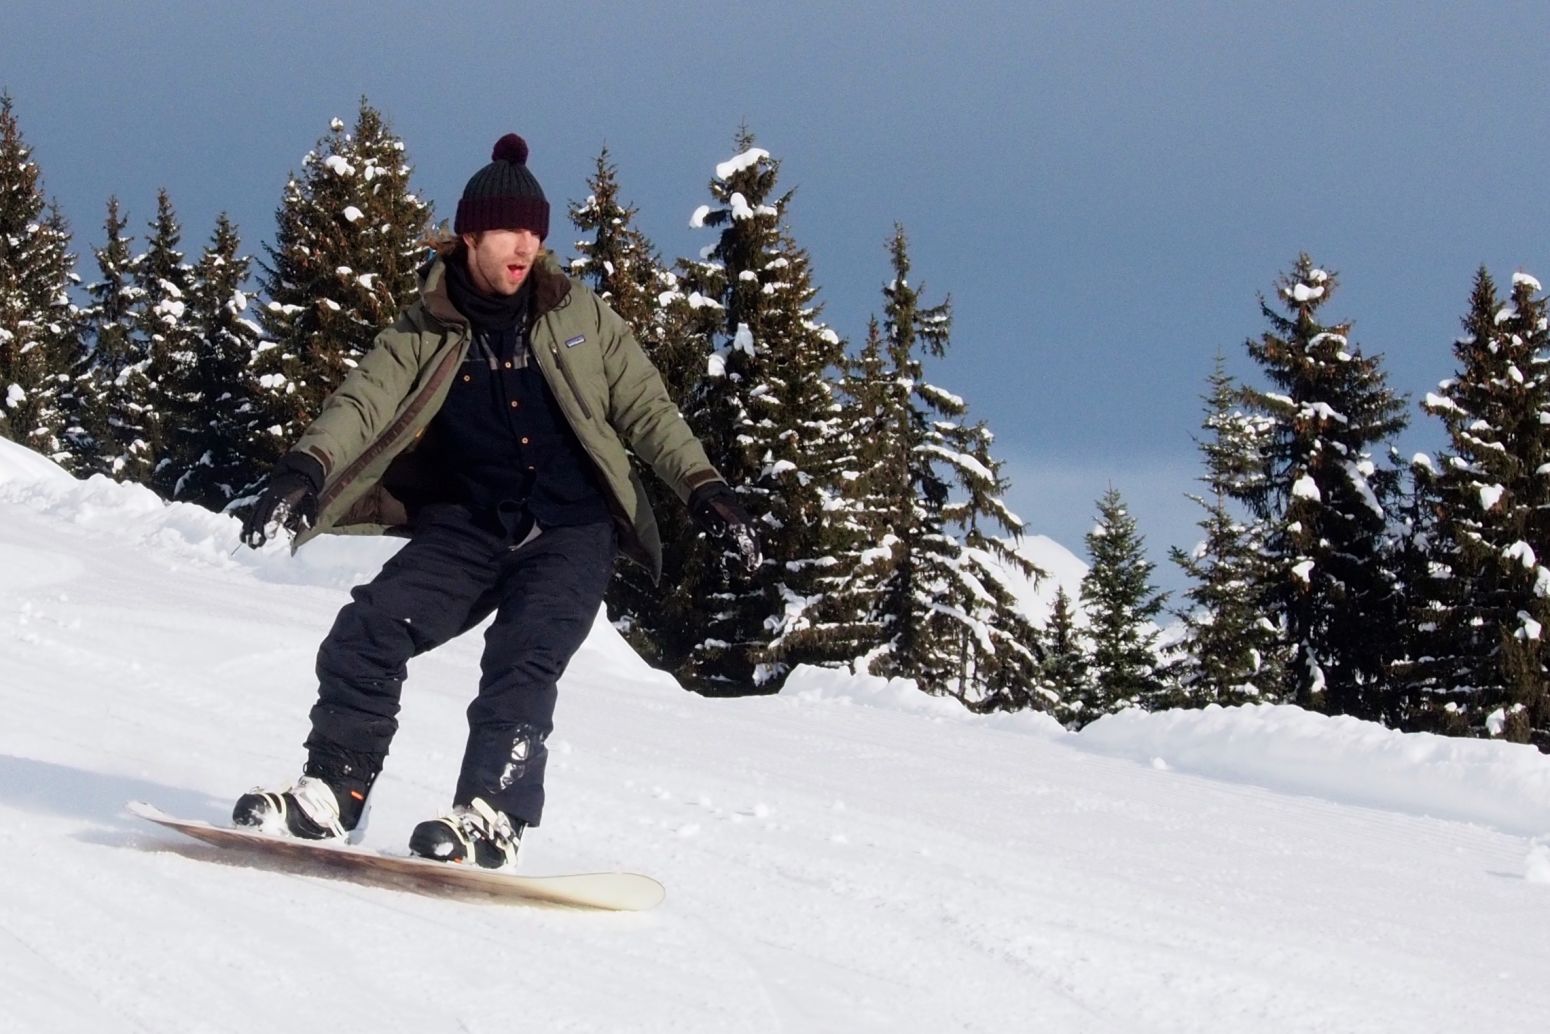 Solo snowboarder in the trees